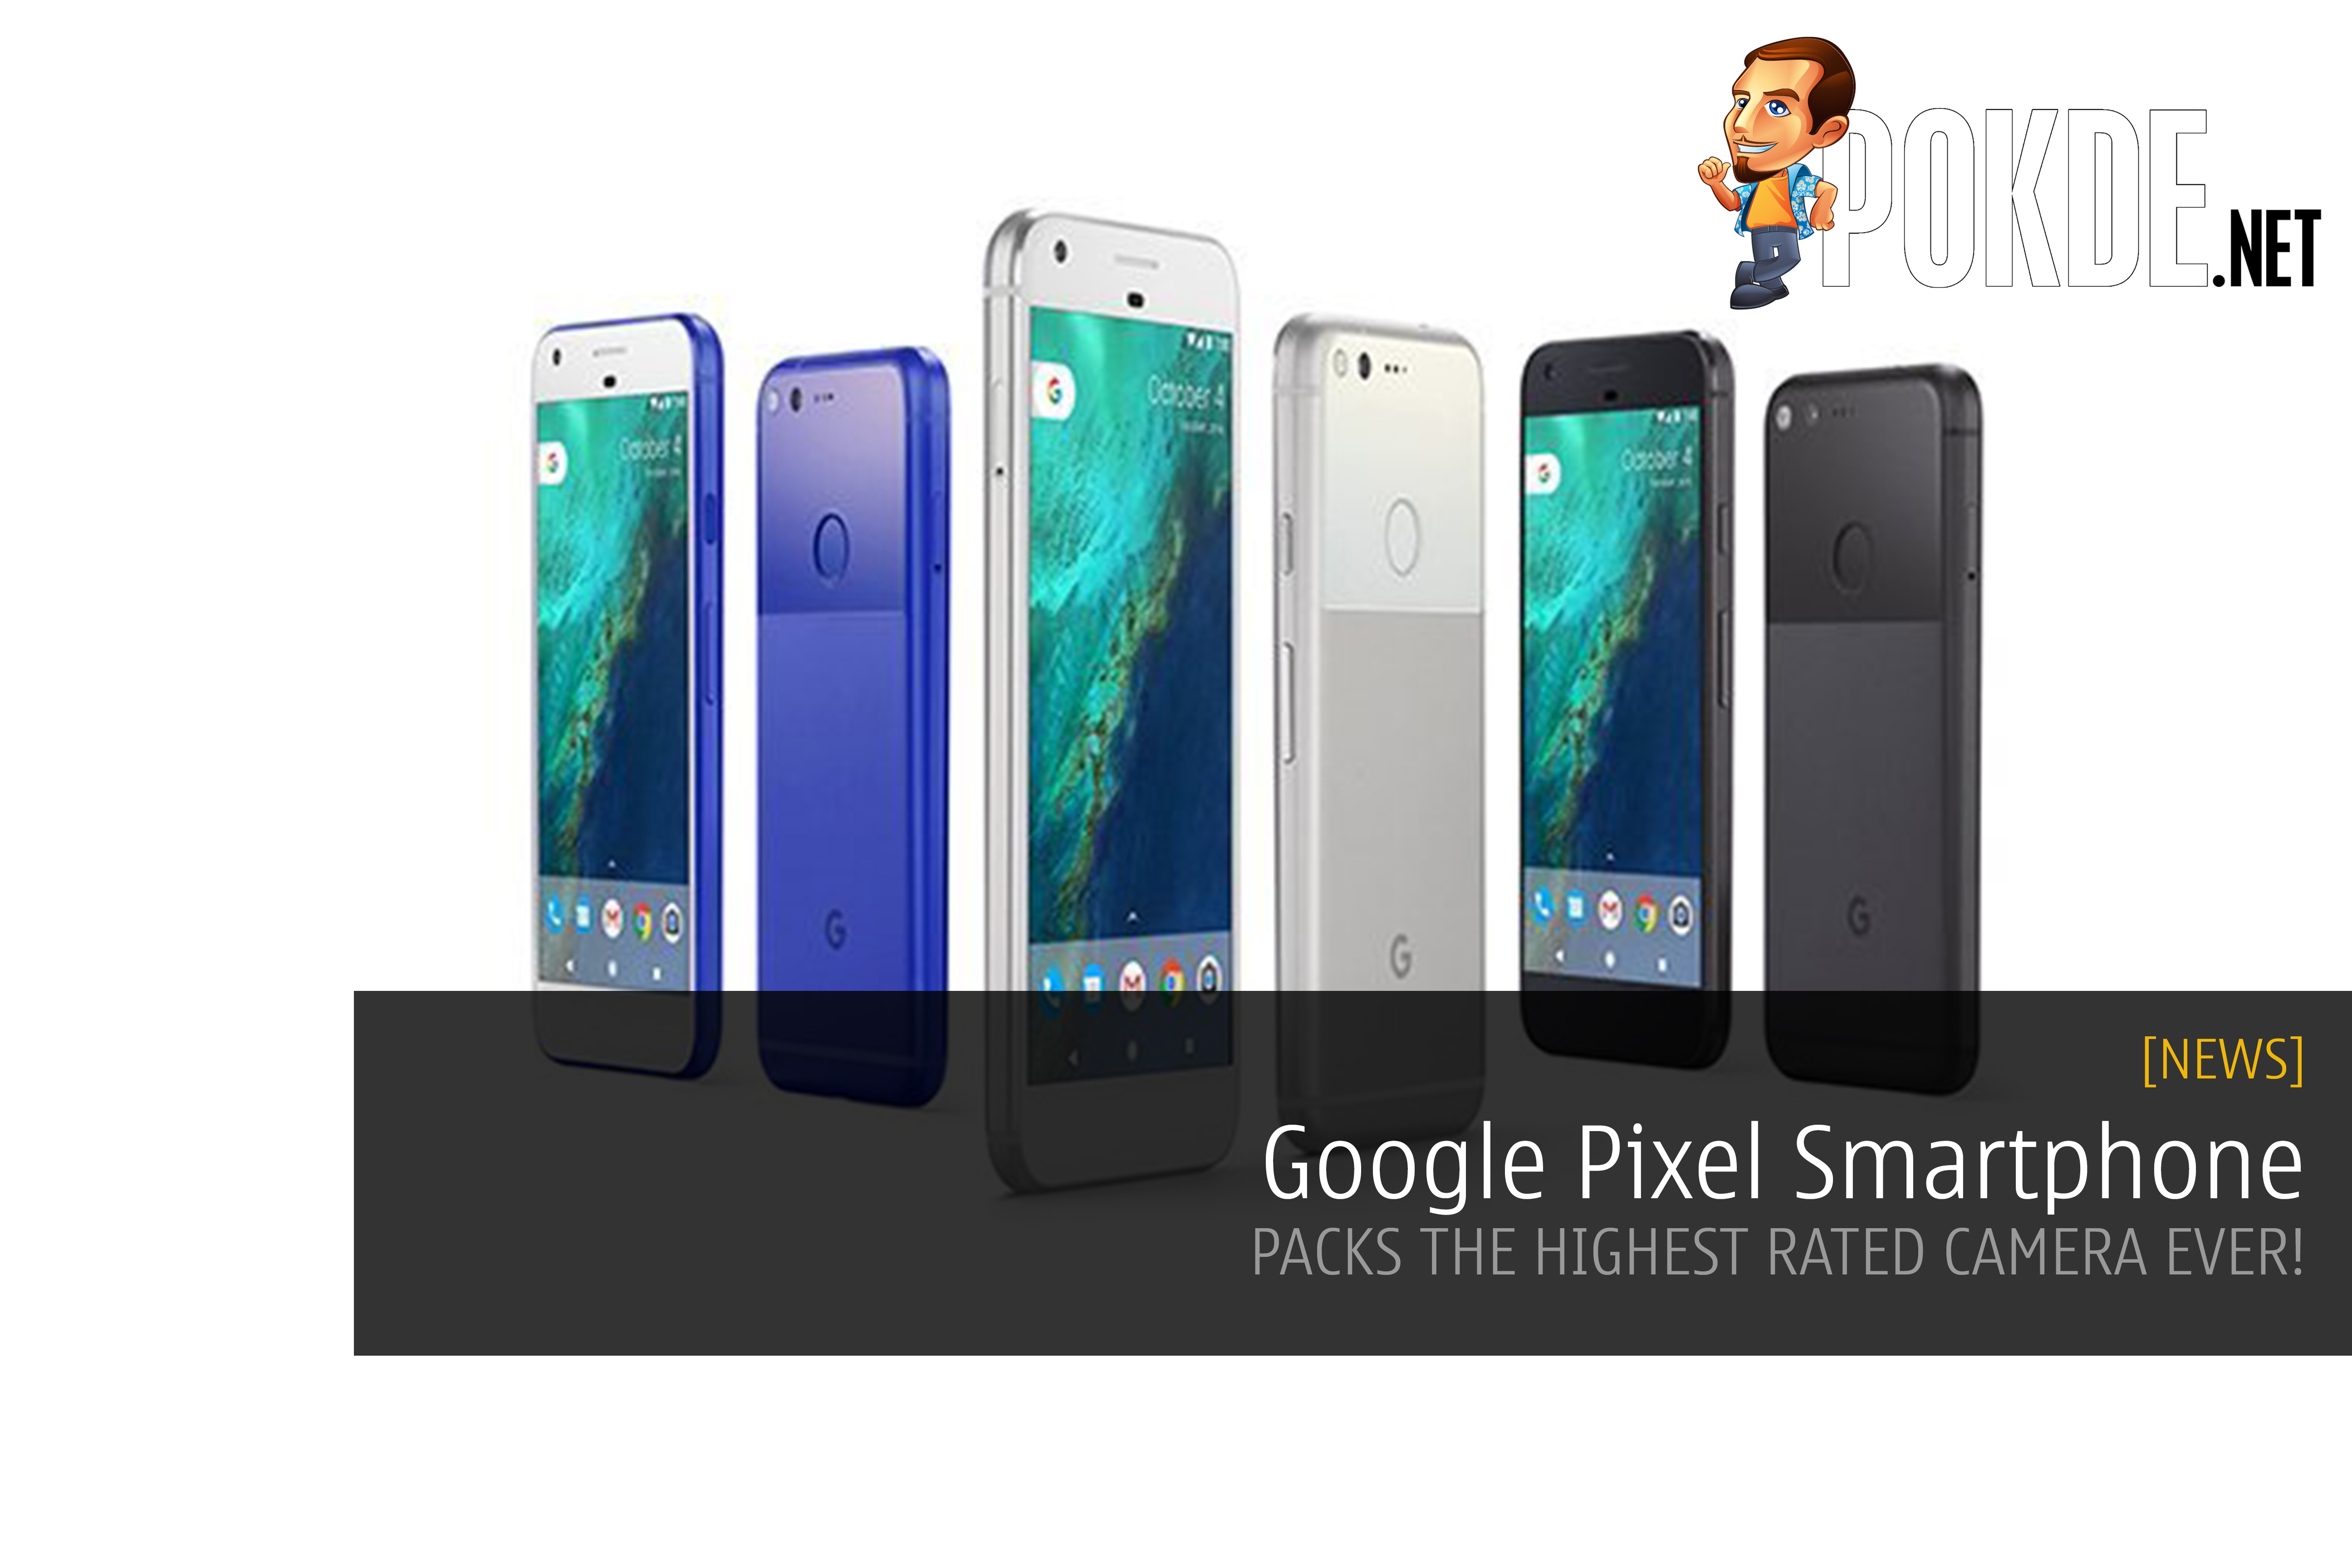 Google Pixel smartphone "made by Google" packs the highest rated camera ever 24